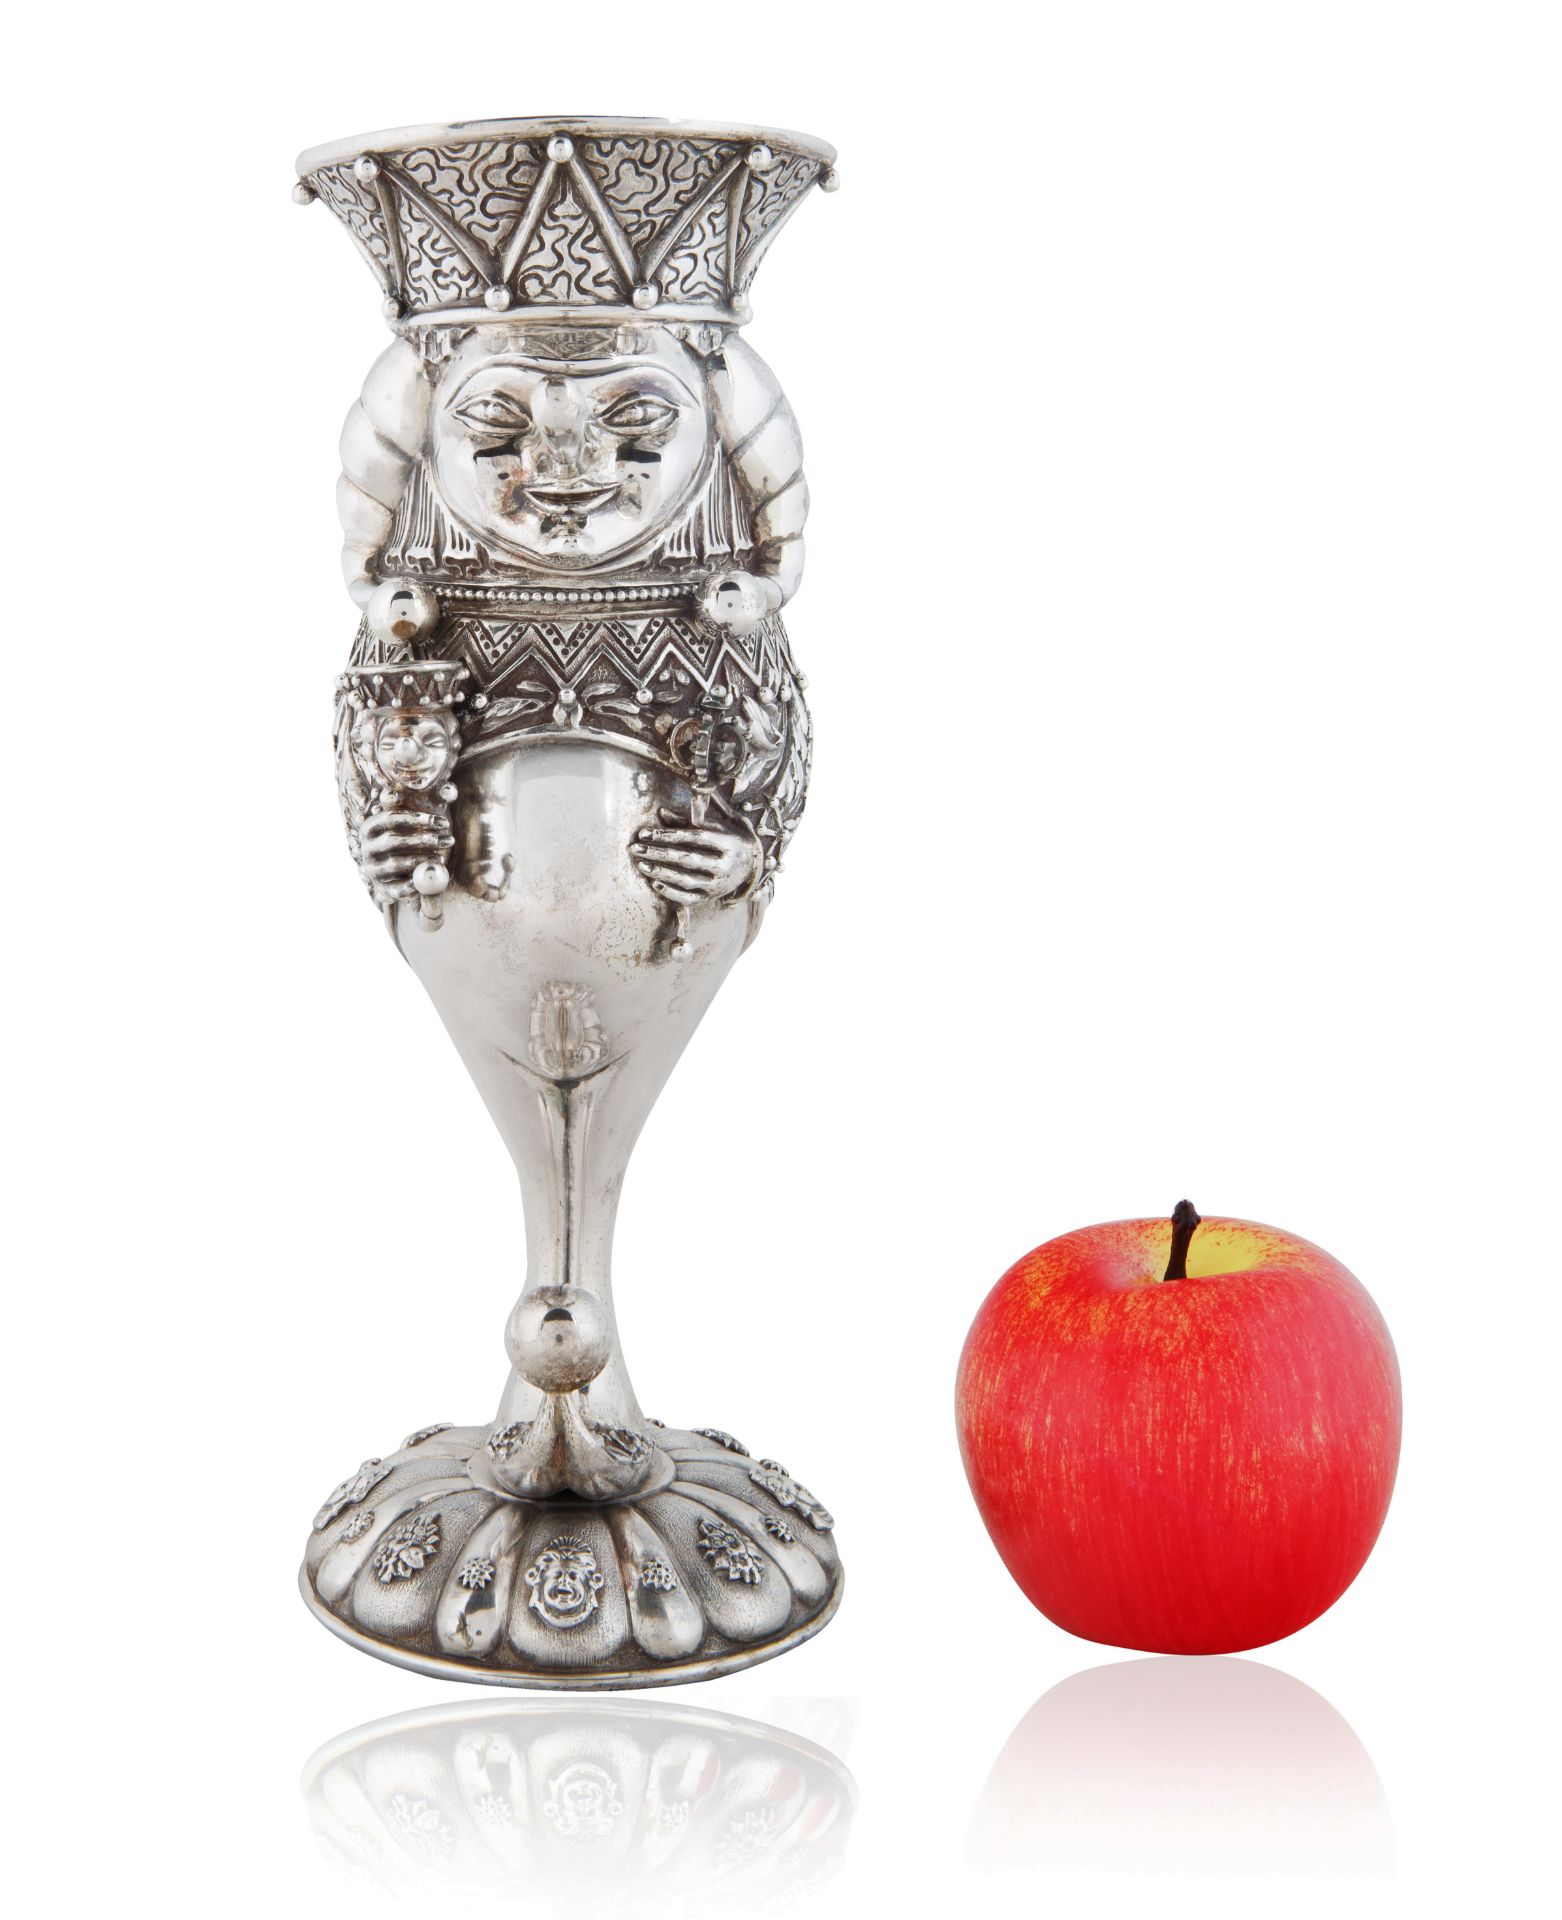 SILVER GOBLET BY MIKHAIL CHEMIAKIN (RUSSIAN B. 1943) - Image 6 of 6